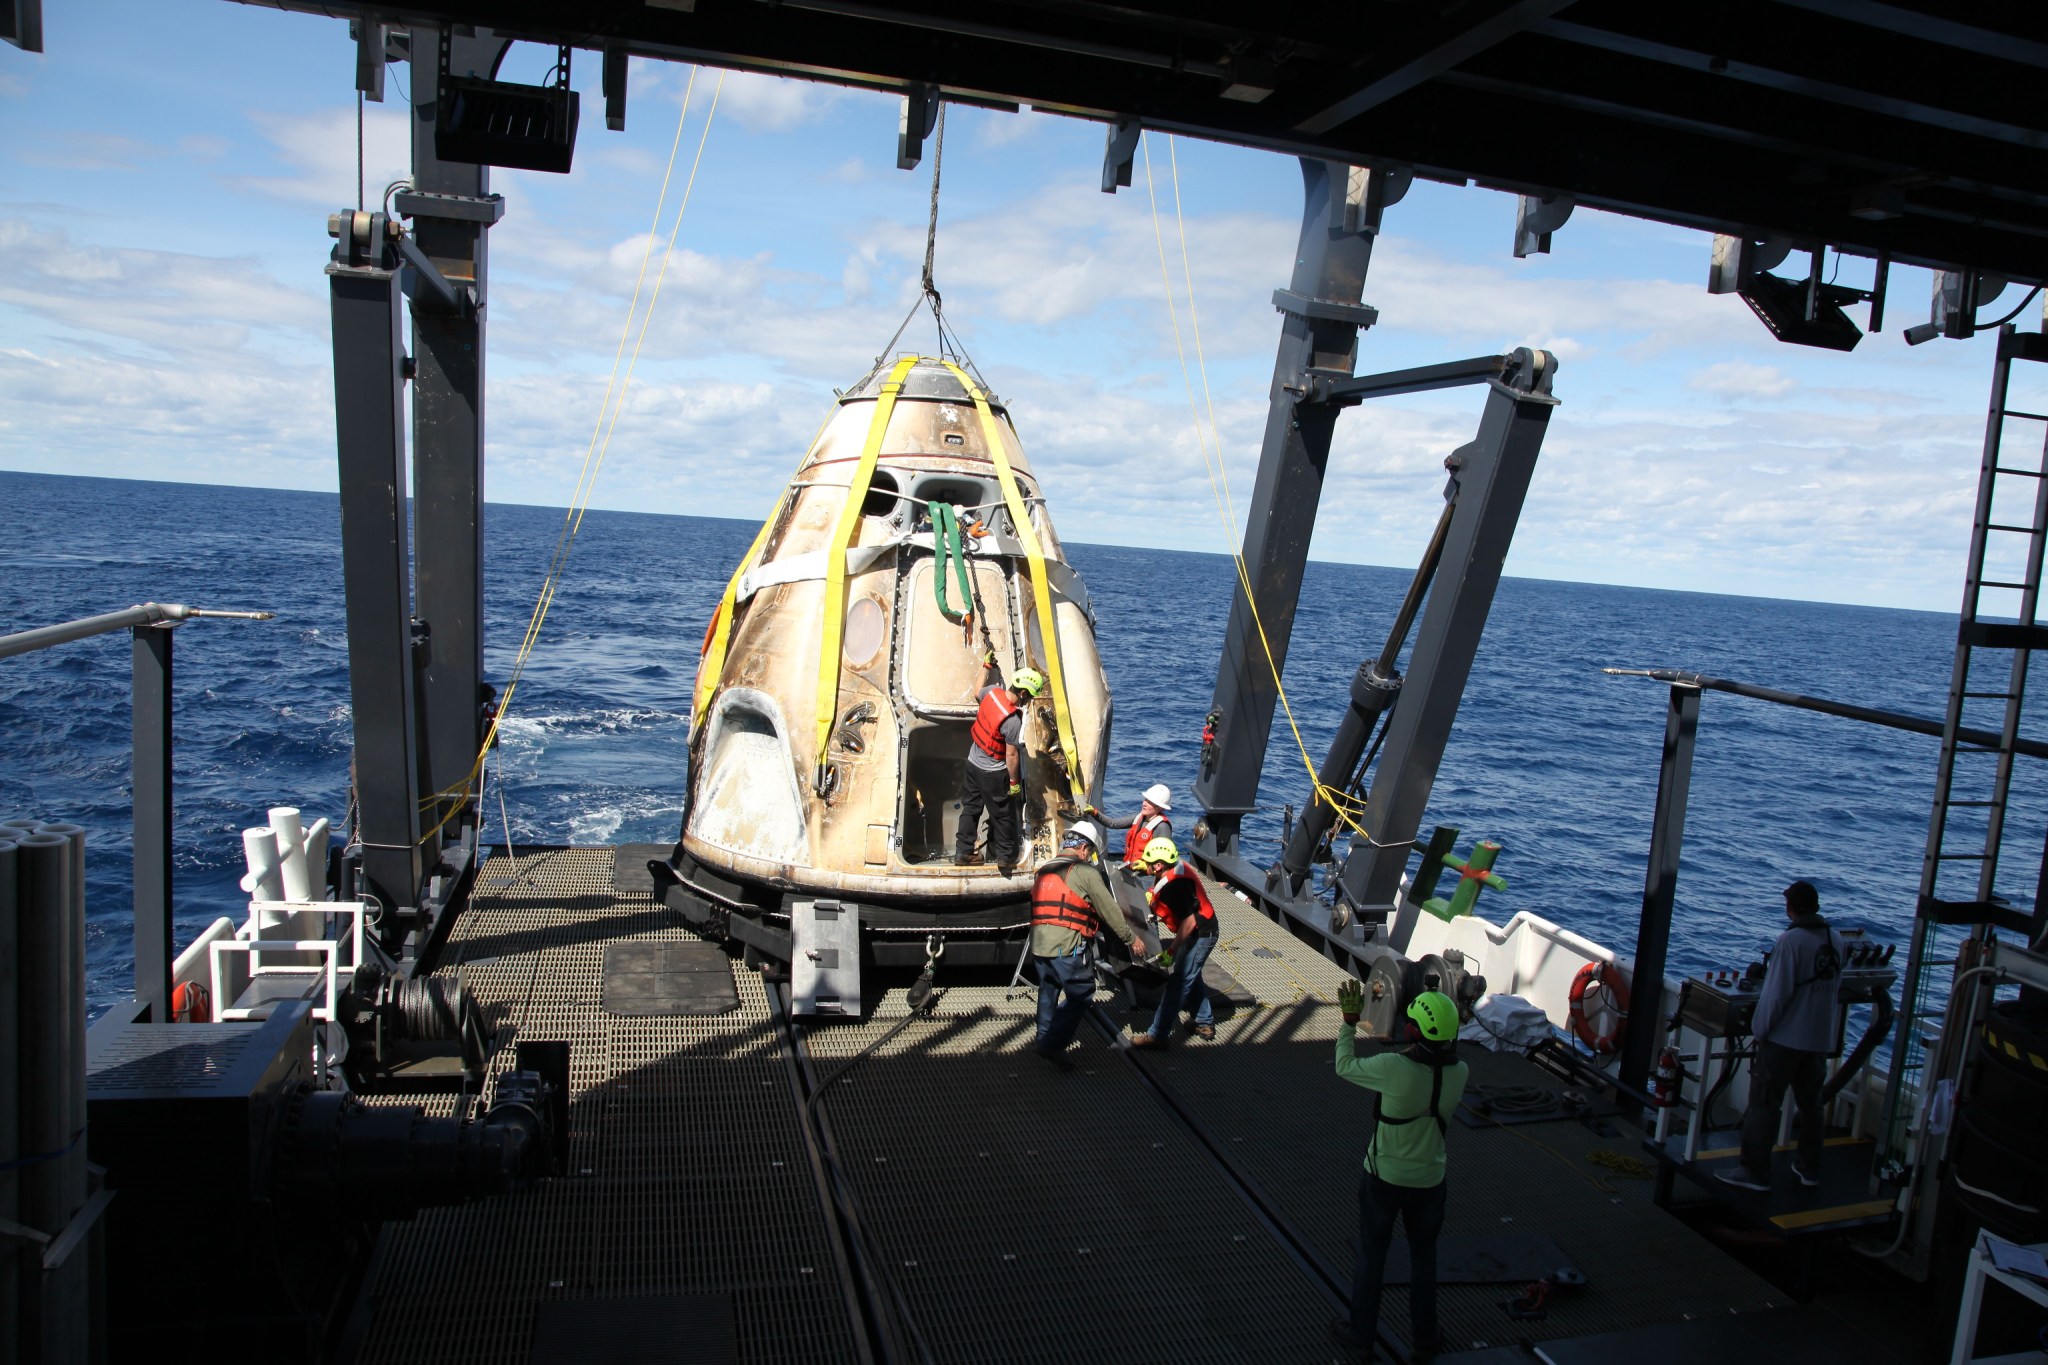 SpaceX’s Crew Dragon is loaded onto the company’s recovery ship, Go Searcher, in the Atlantic Ocean on March 8, 2019.